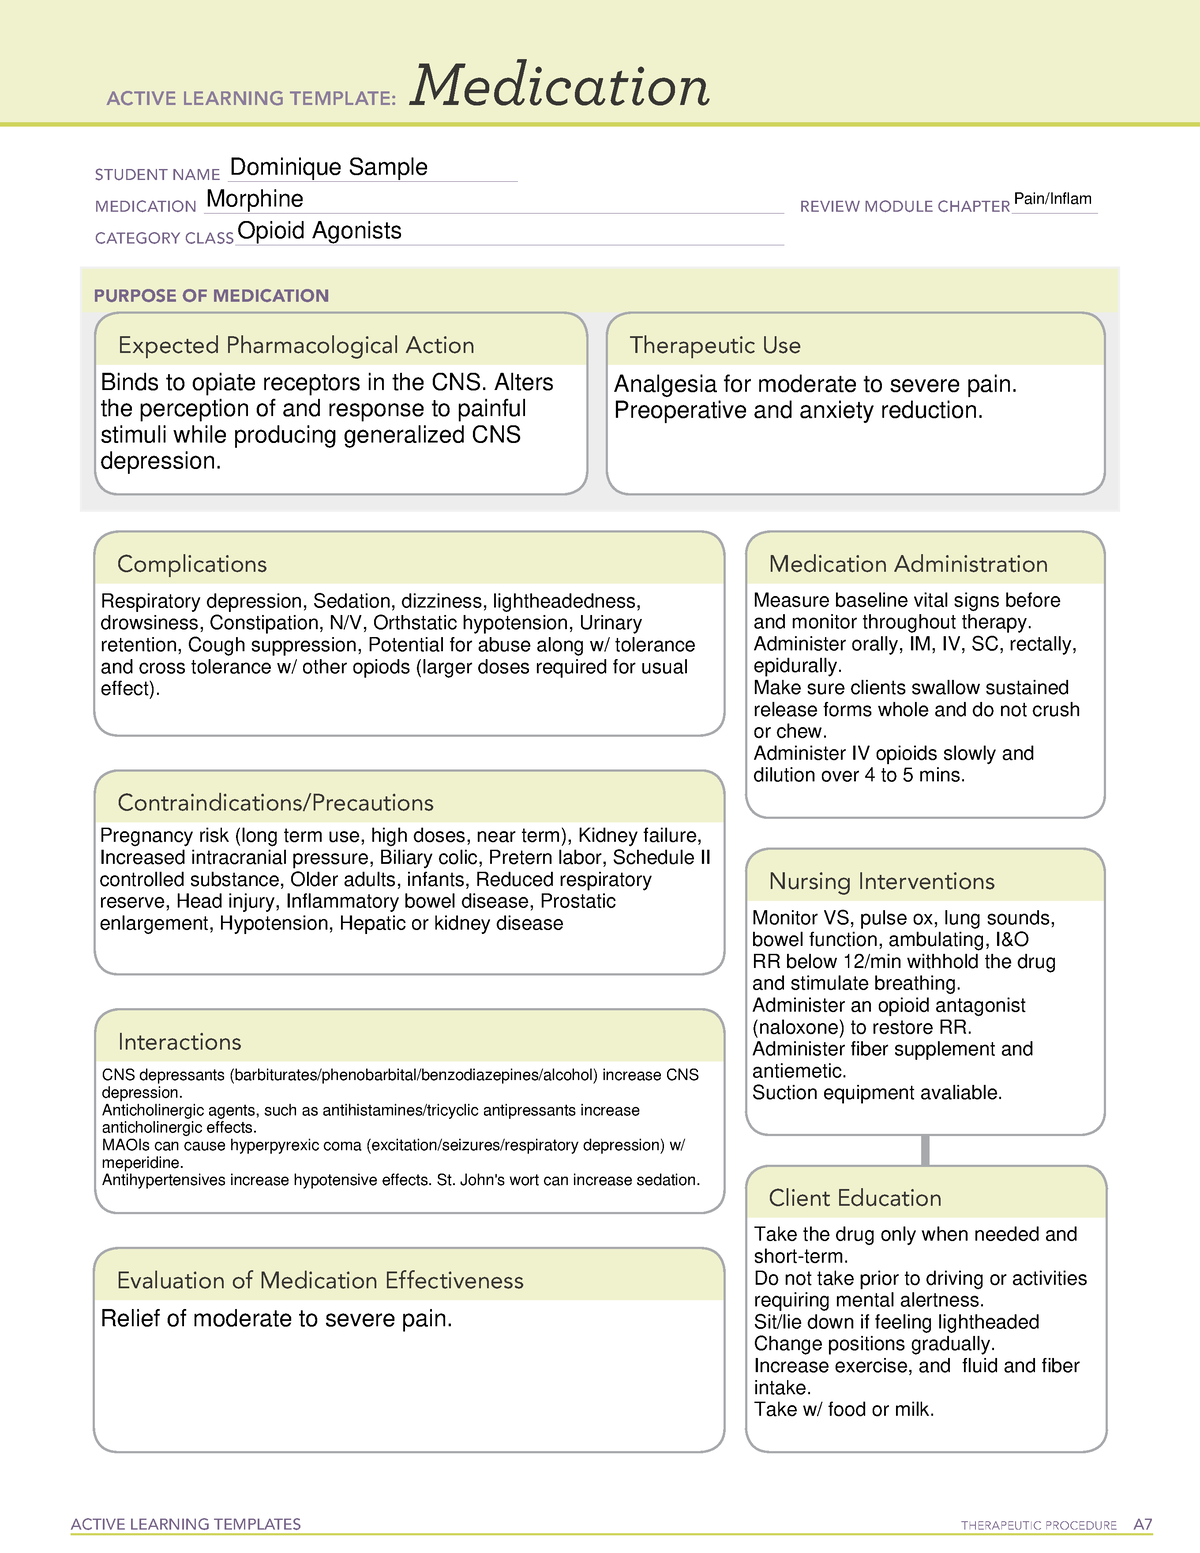 Medication Morphine Active Learning Template Active L vrogue co